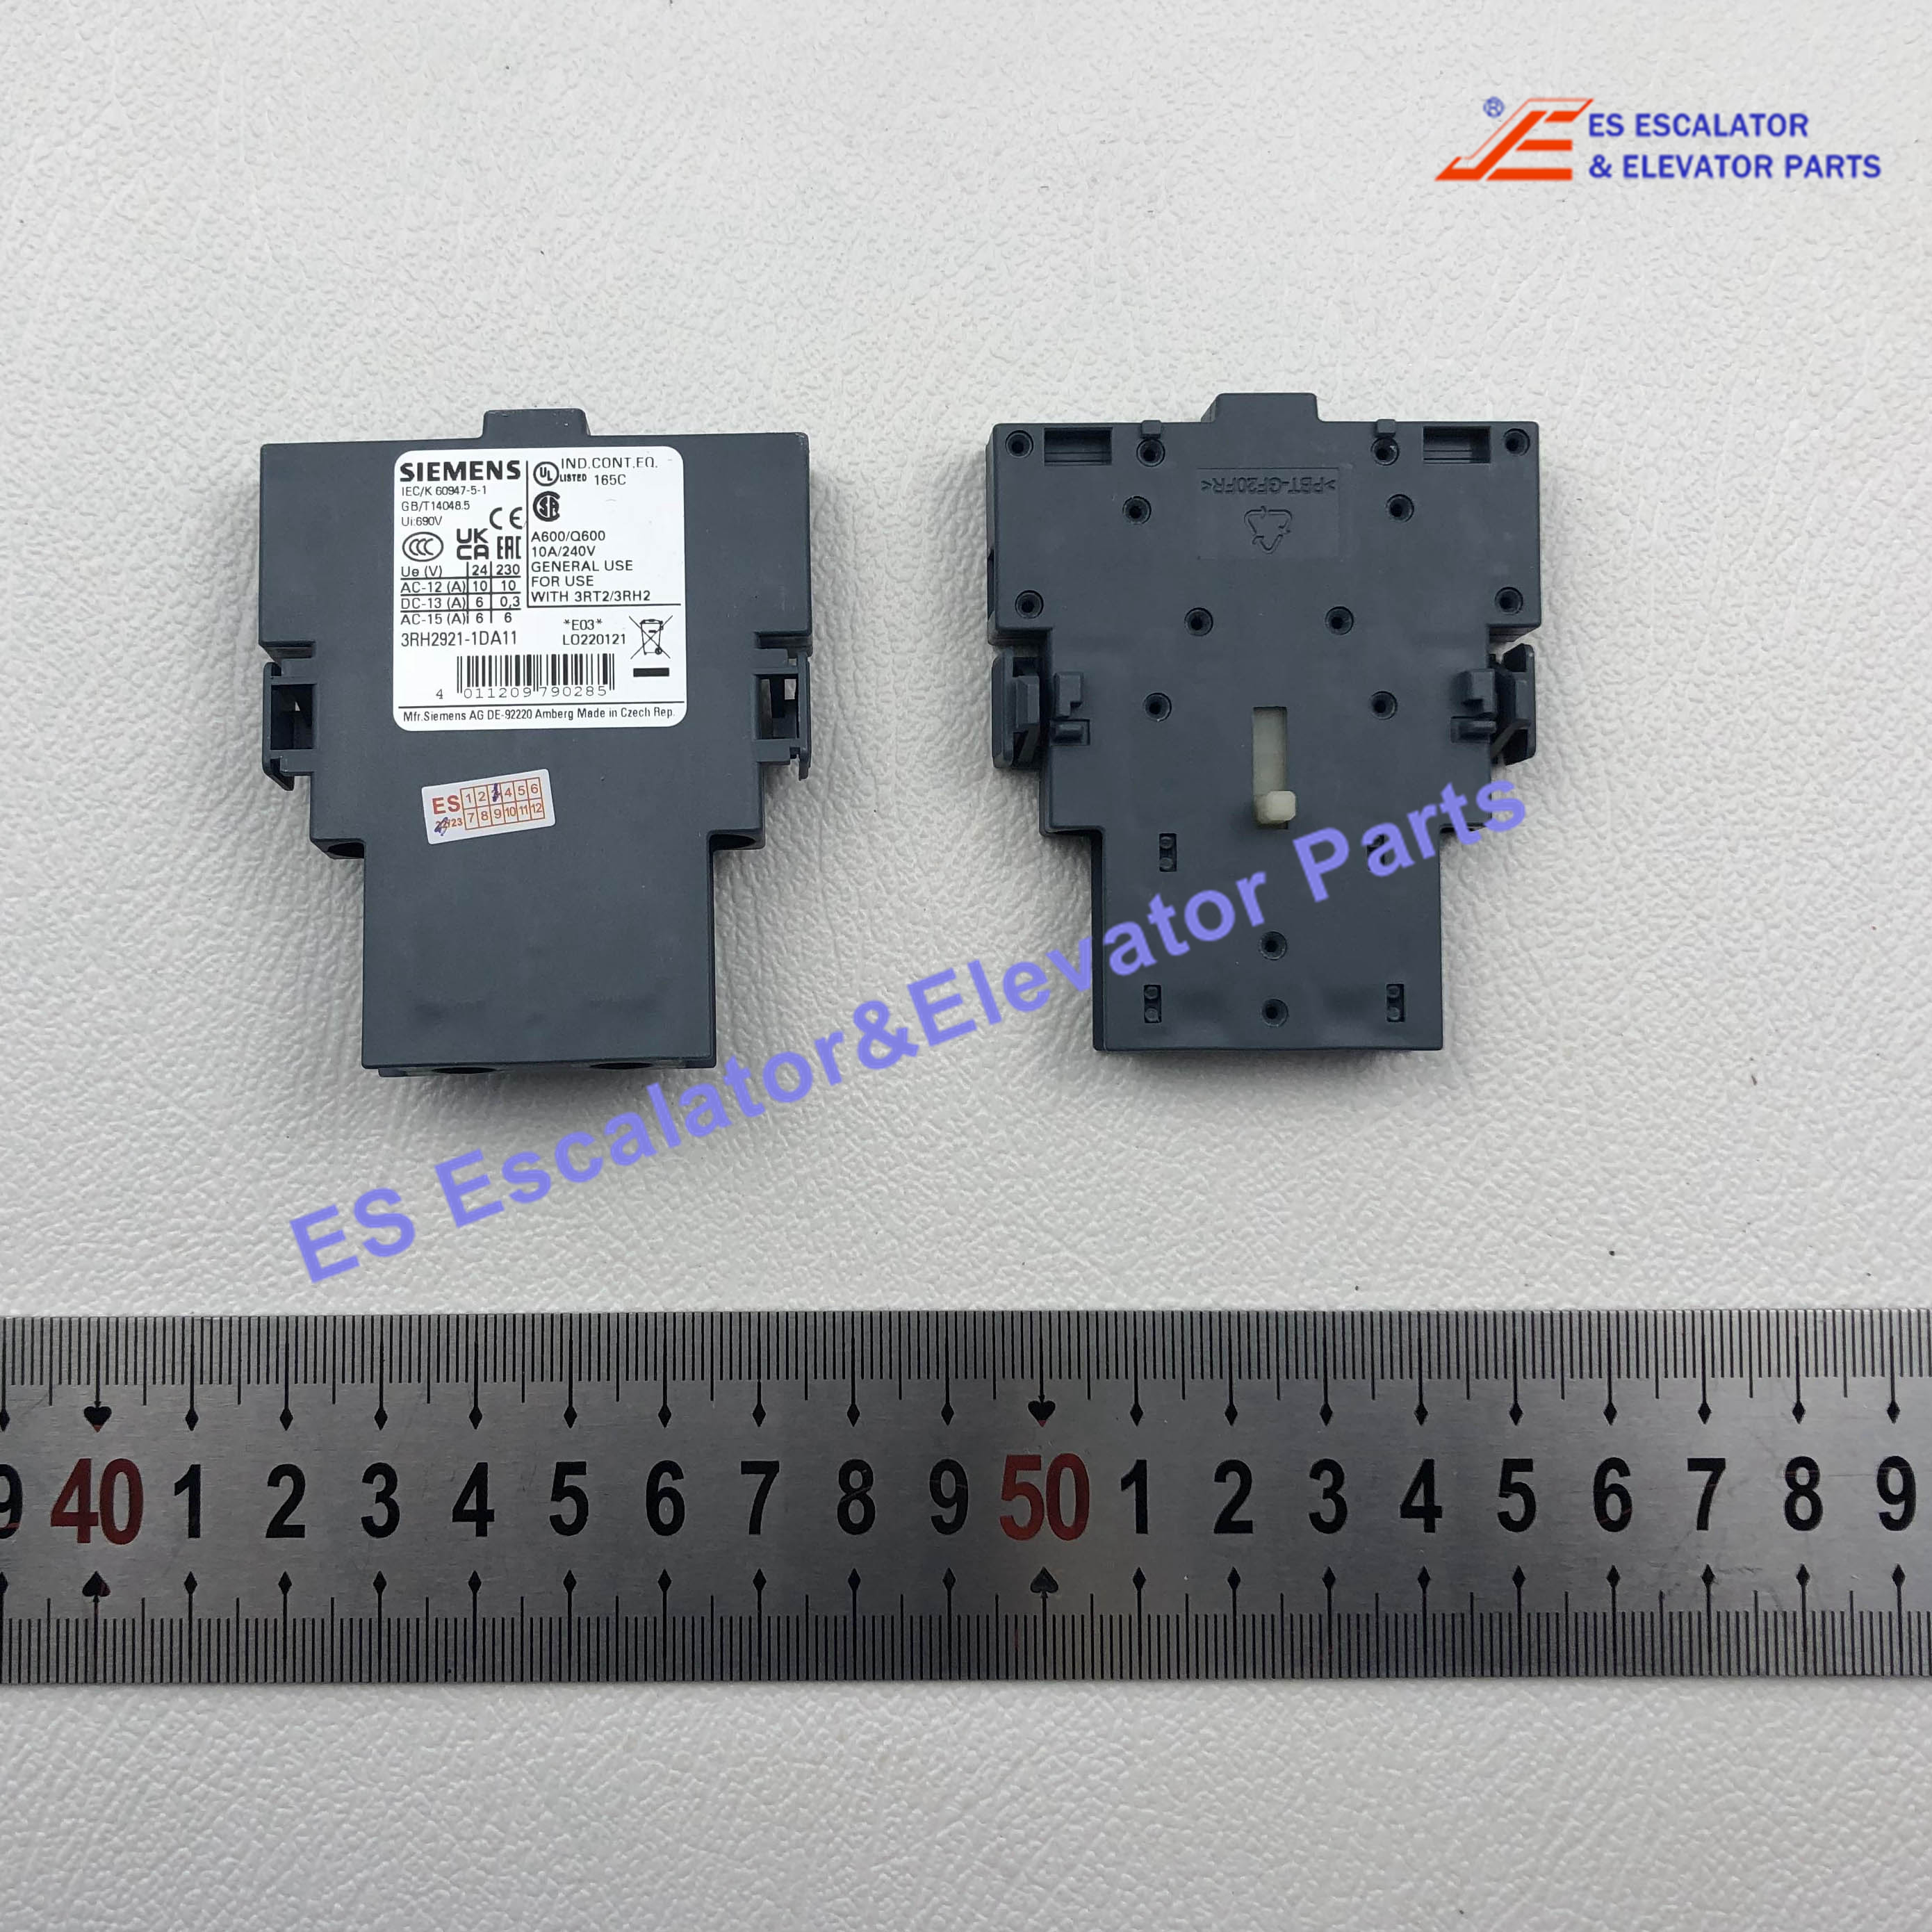 3RH2921-1DA02 Elevator Auxiliary Switch Lateral 2 NC Current Path 1 NC 1 NC For 3RH And 3RT Screw Terminal R: 31/32 41/42 L: 51/52 61/62 Use For Siemens